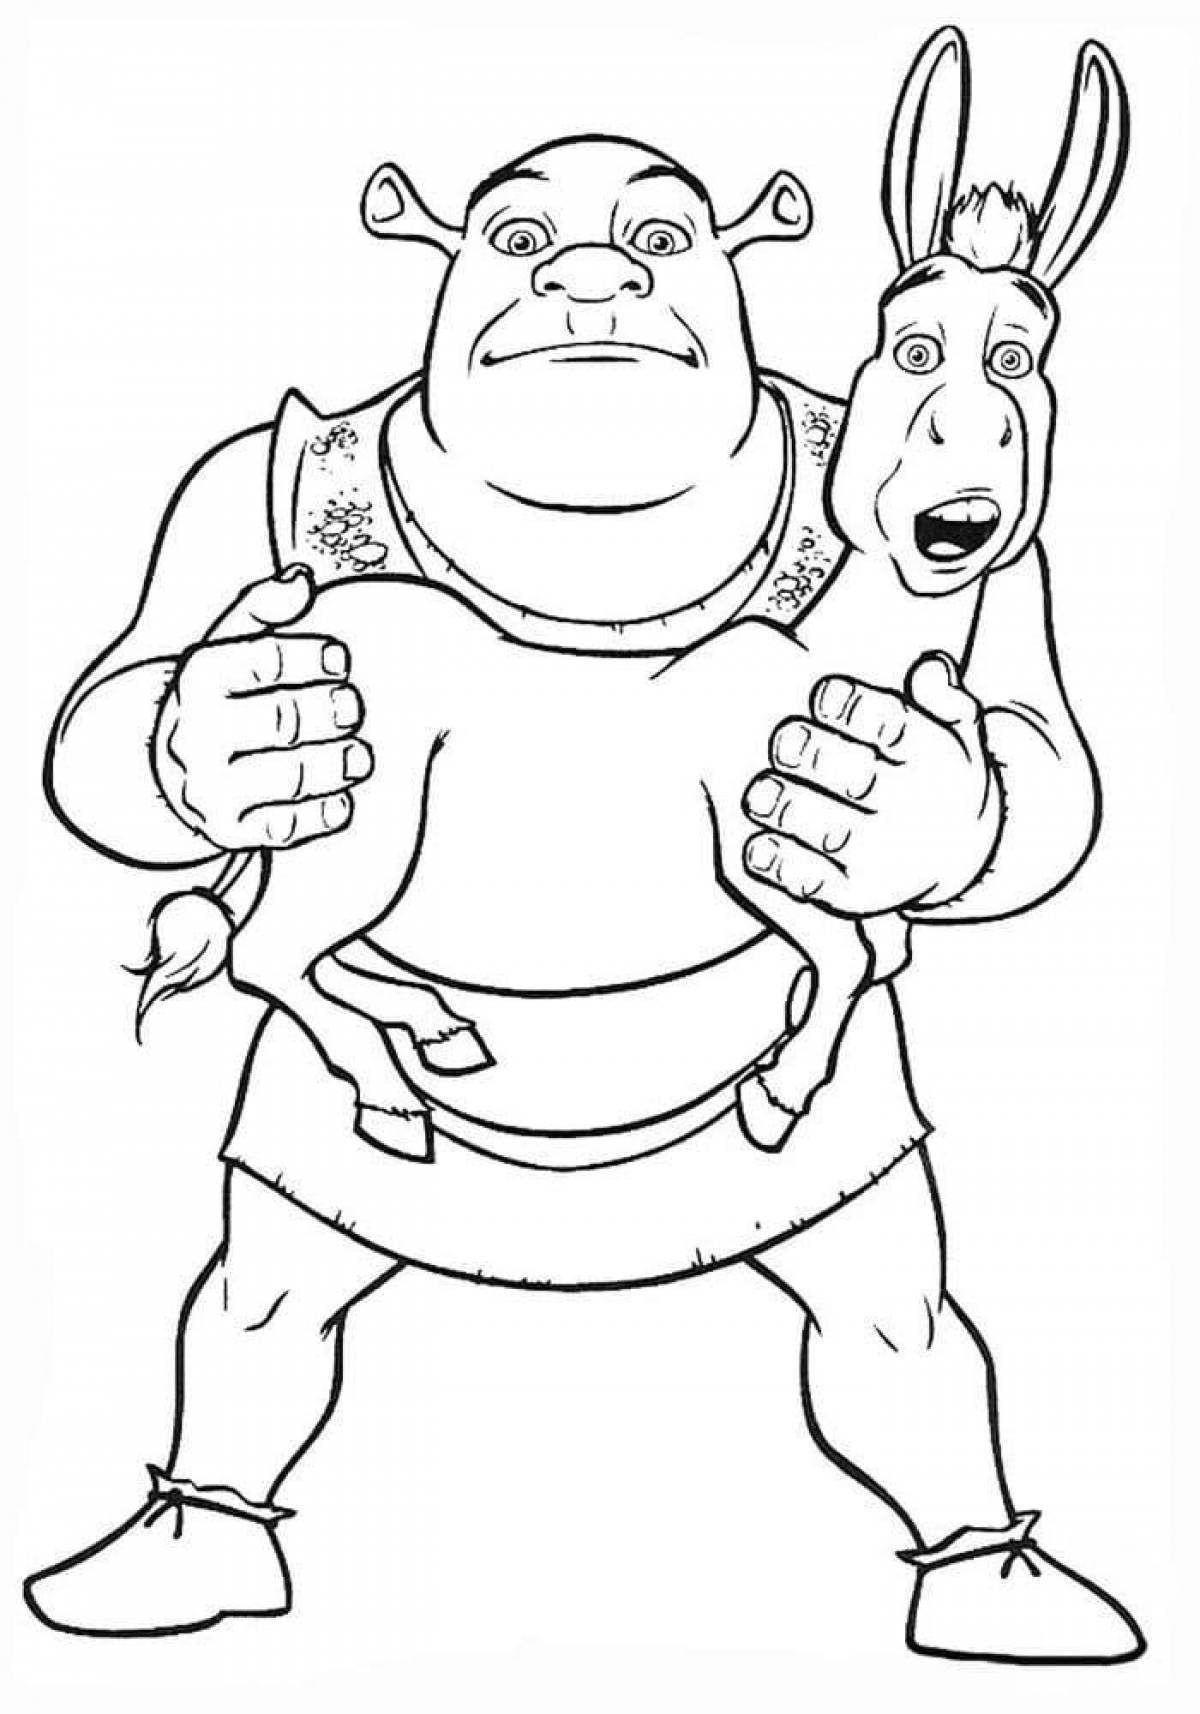 Shrek's colorful coloring page